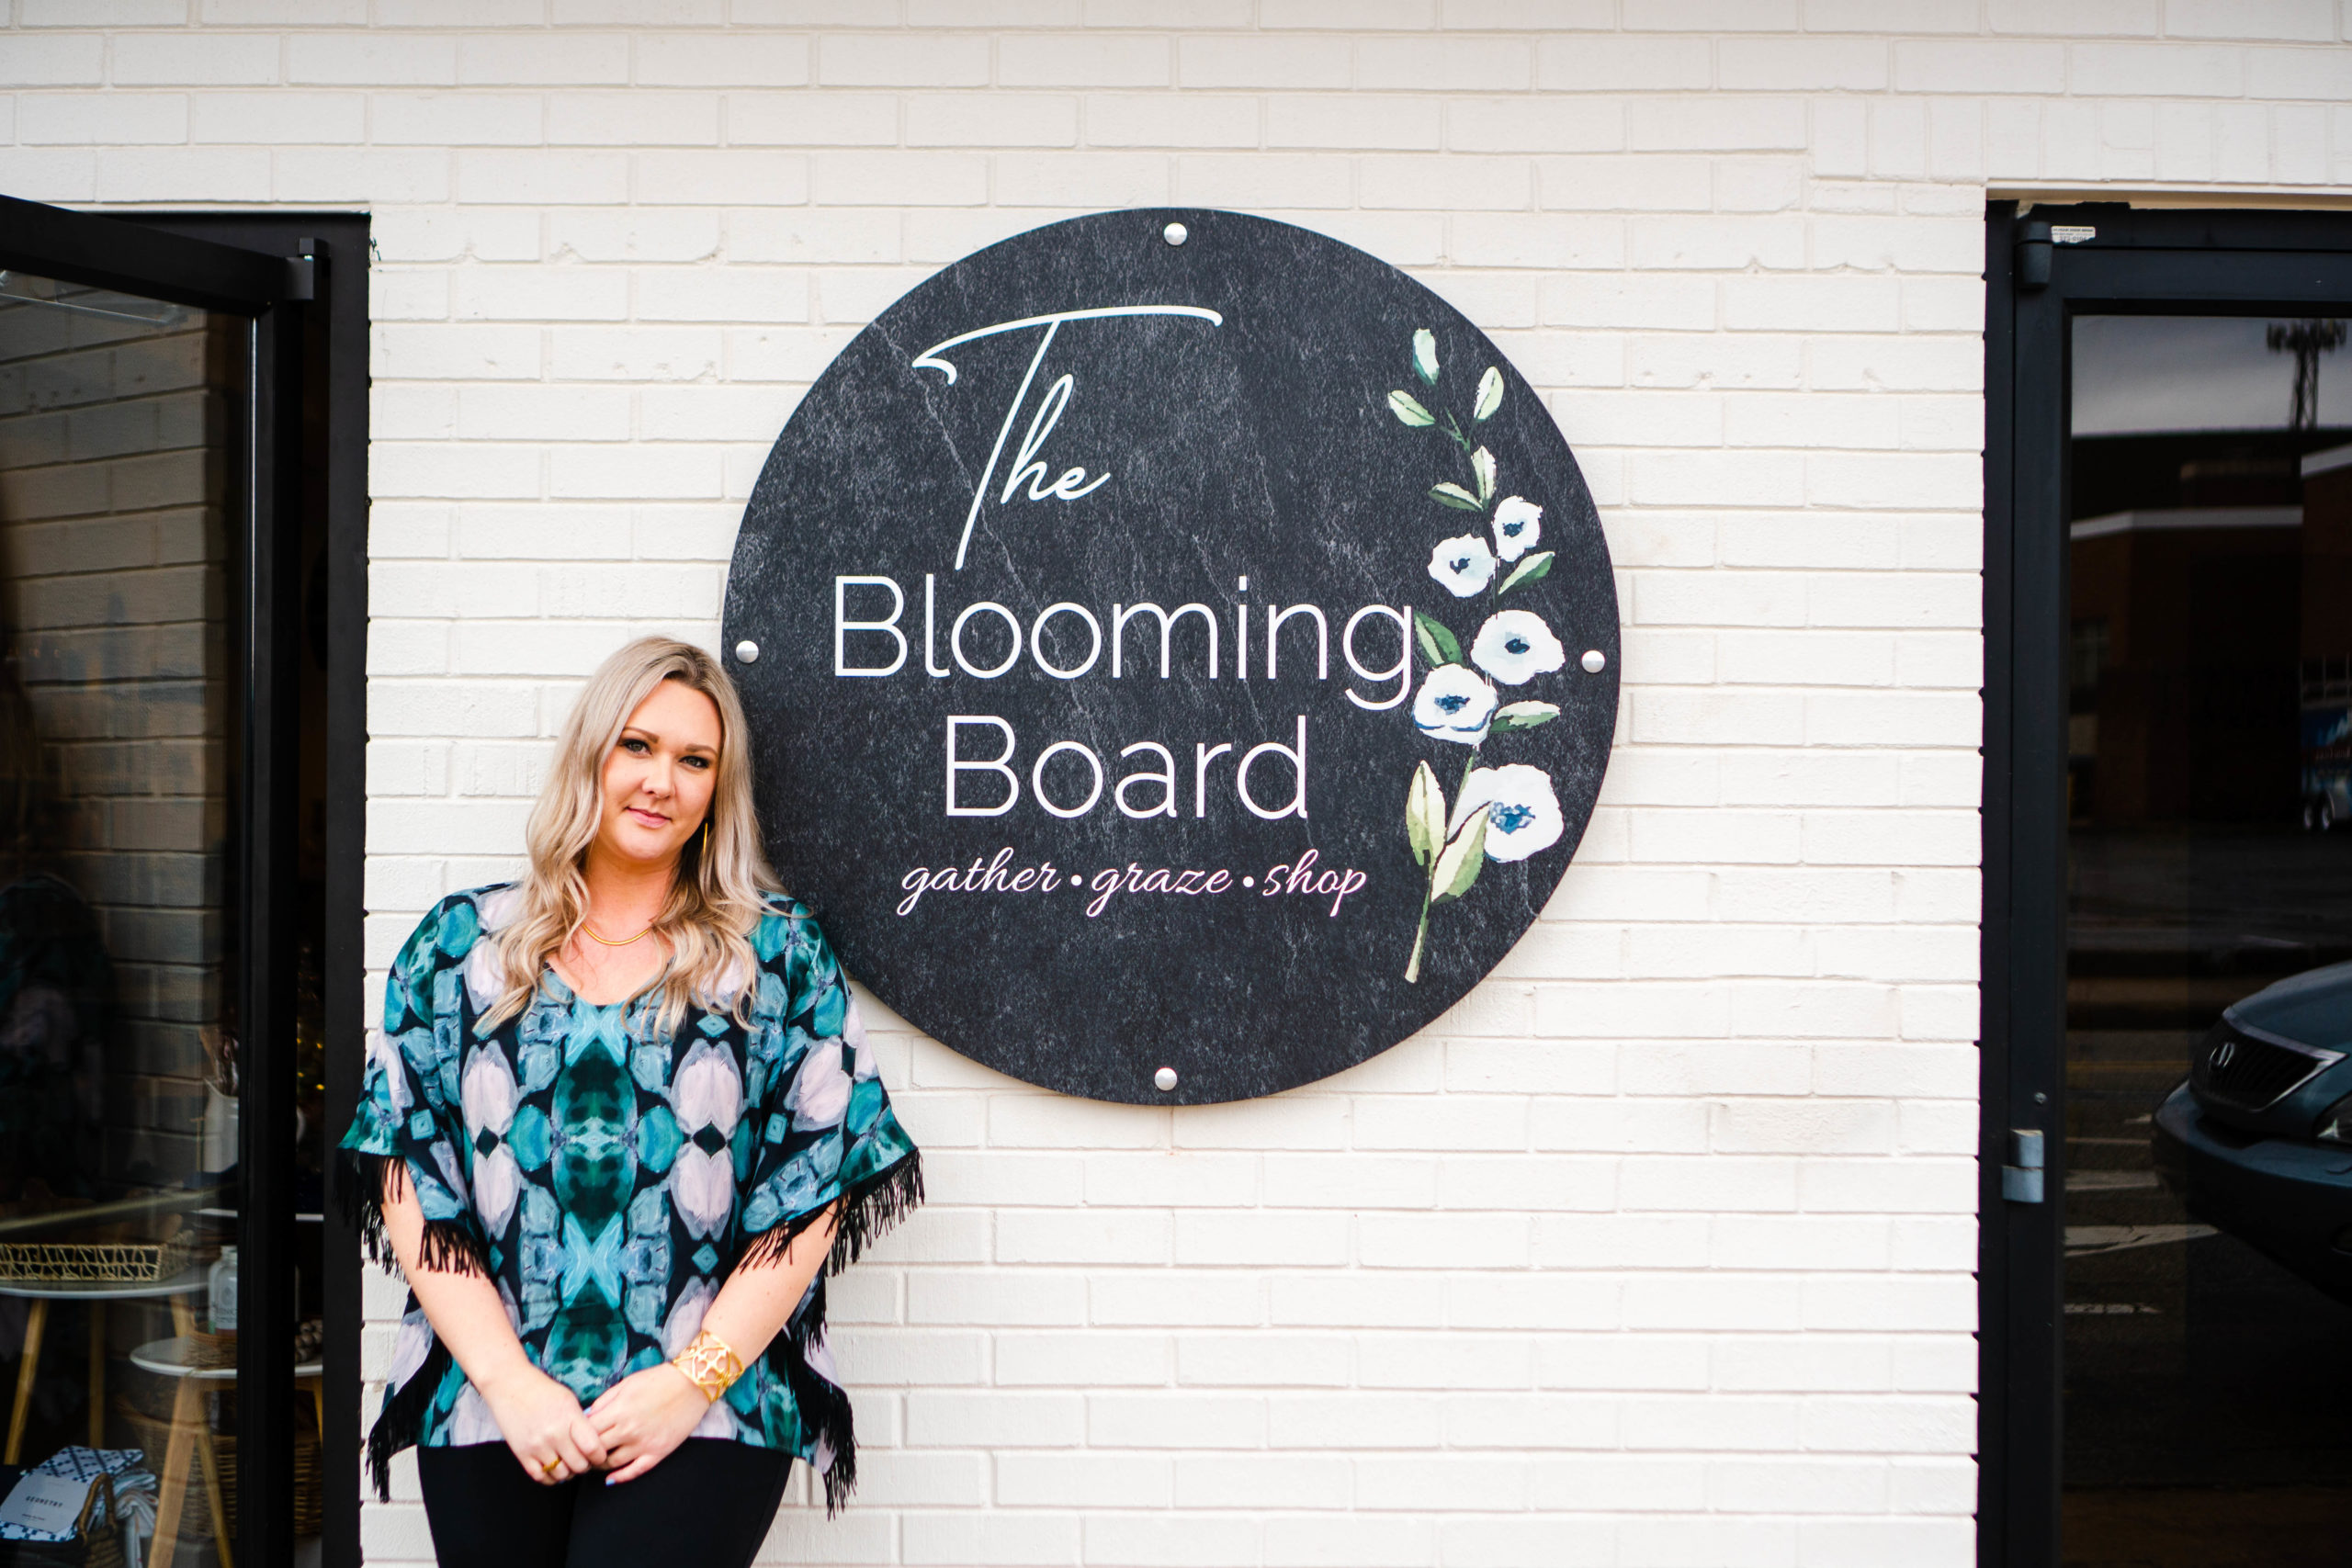 Brandi Crumley, owner of the Blooming Board, a charcuterie board shop in High Point, NC stands in front of her storefront in downtown High Point.